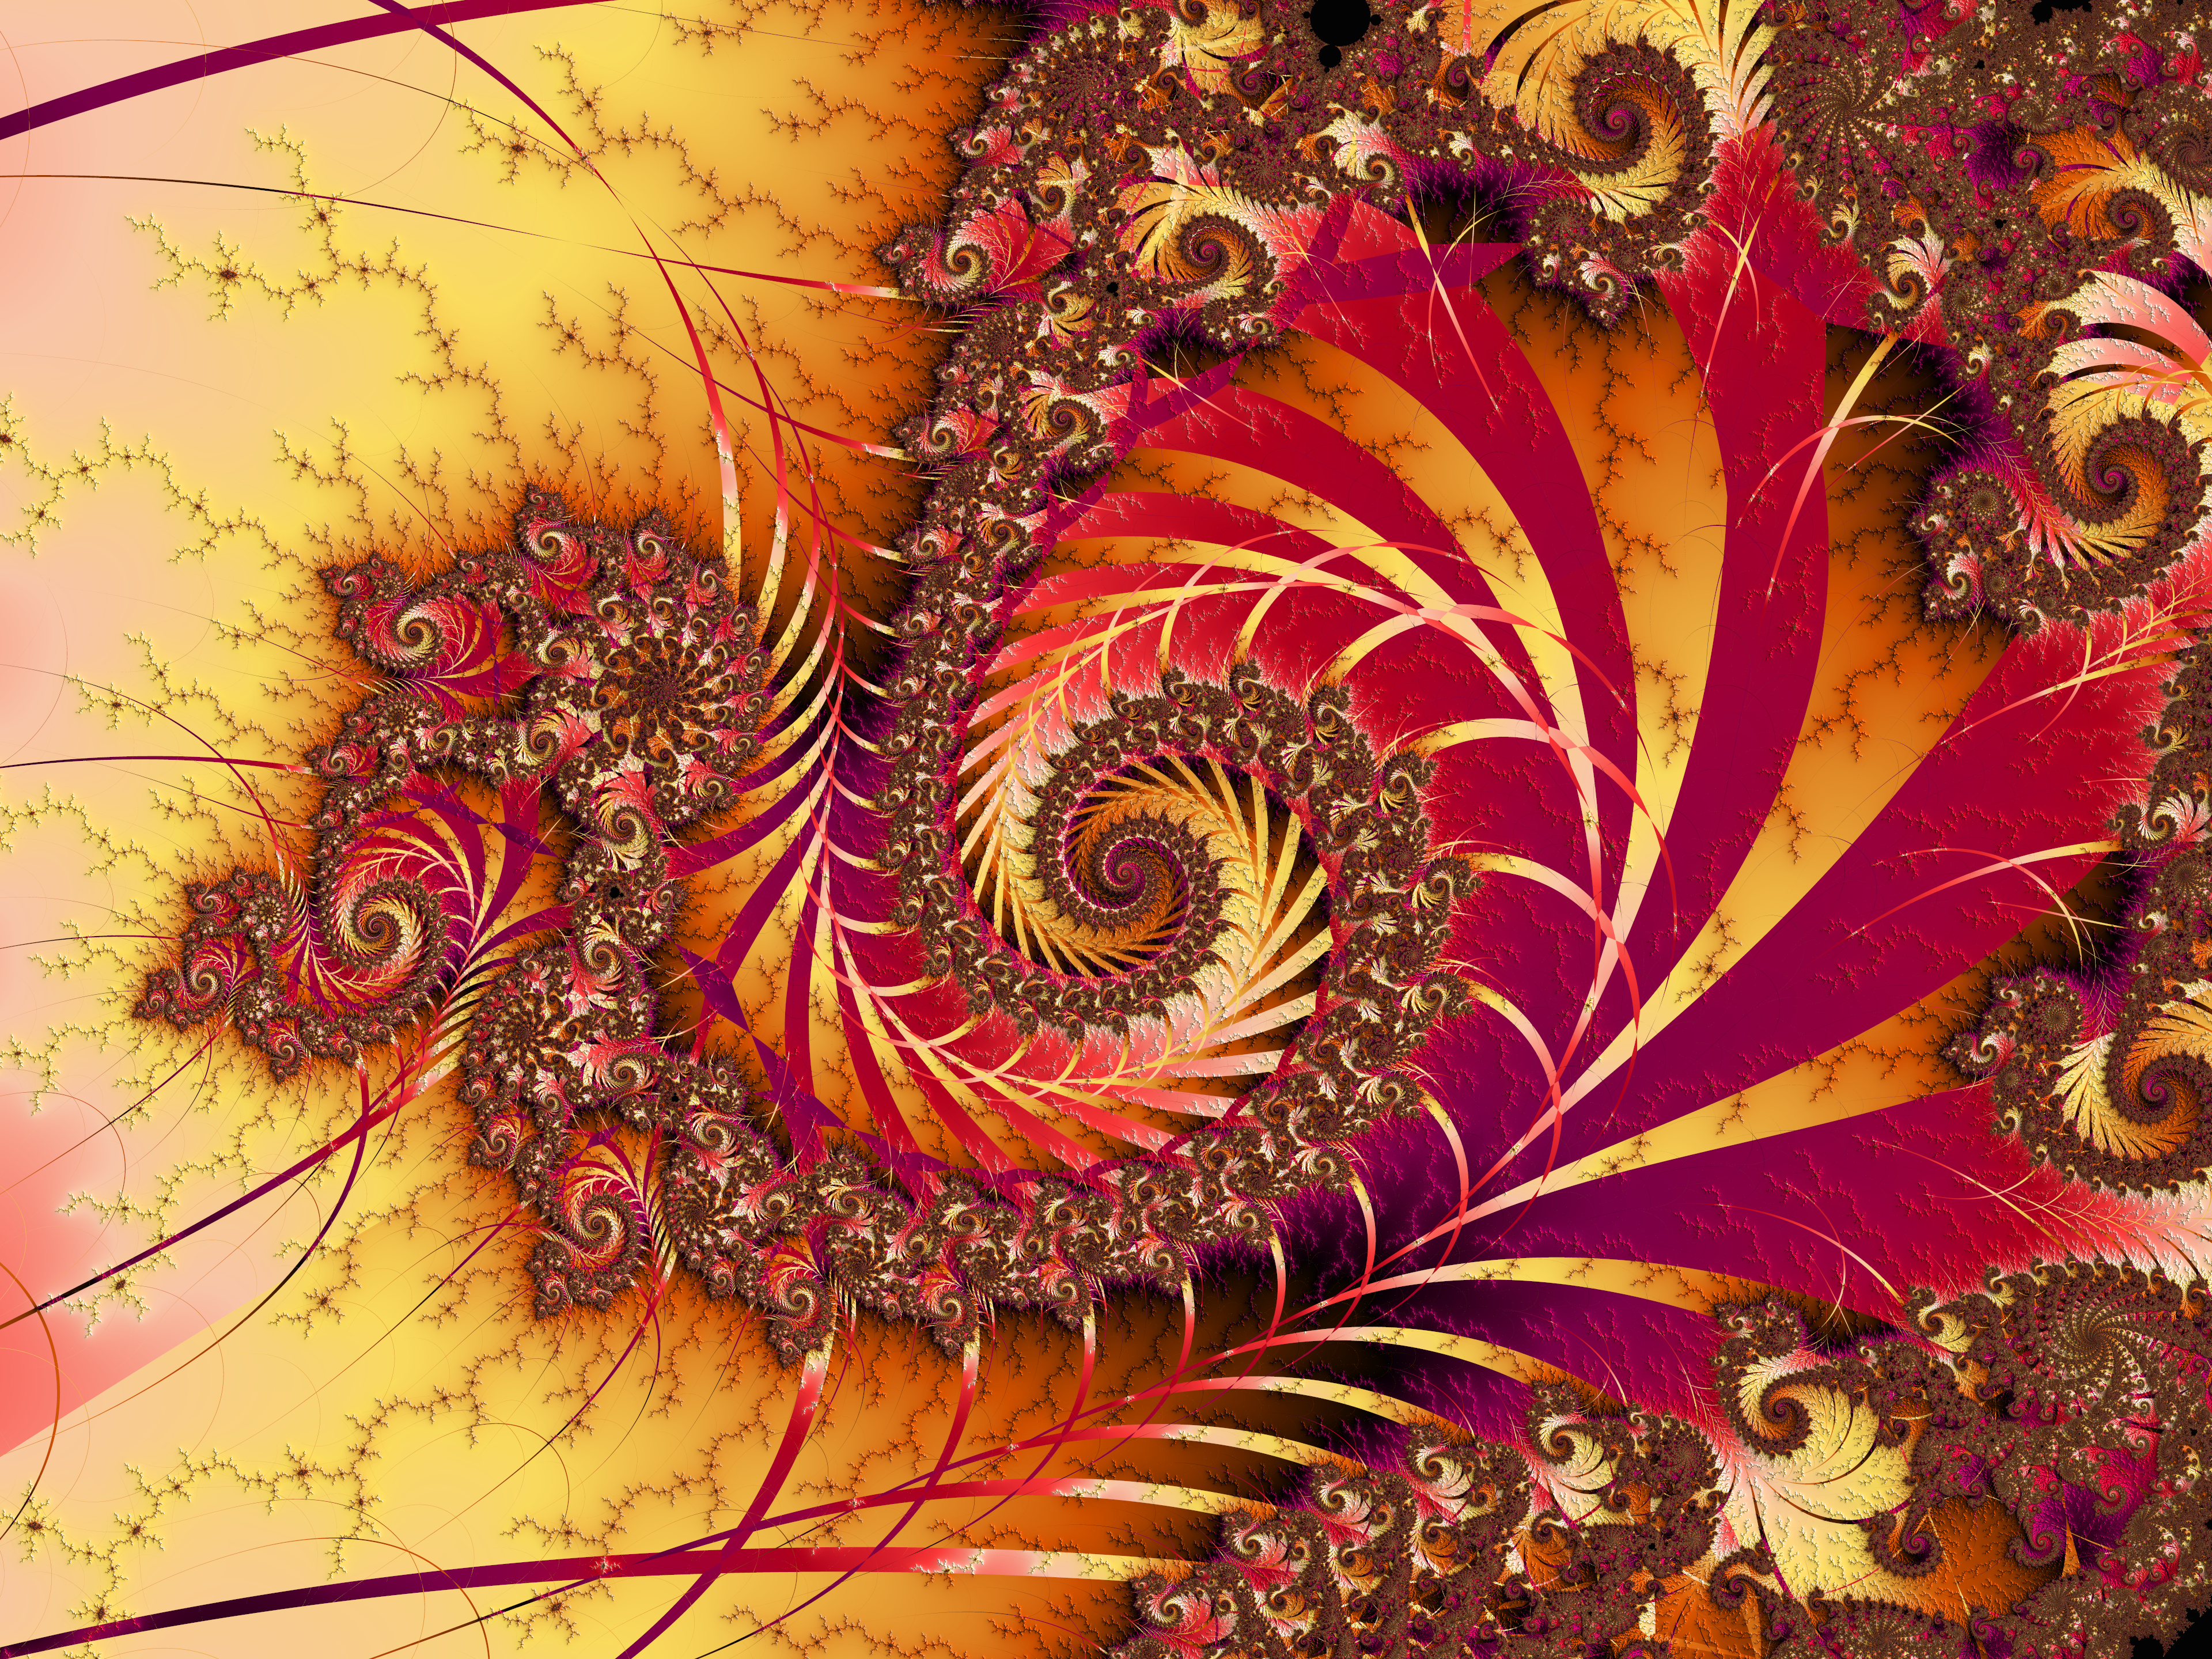 HD fractal wallpaper featuring a psychedelic and trippy CGI spiral pattern in red and gold tones, perfect for a vibrant desktop background.